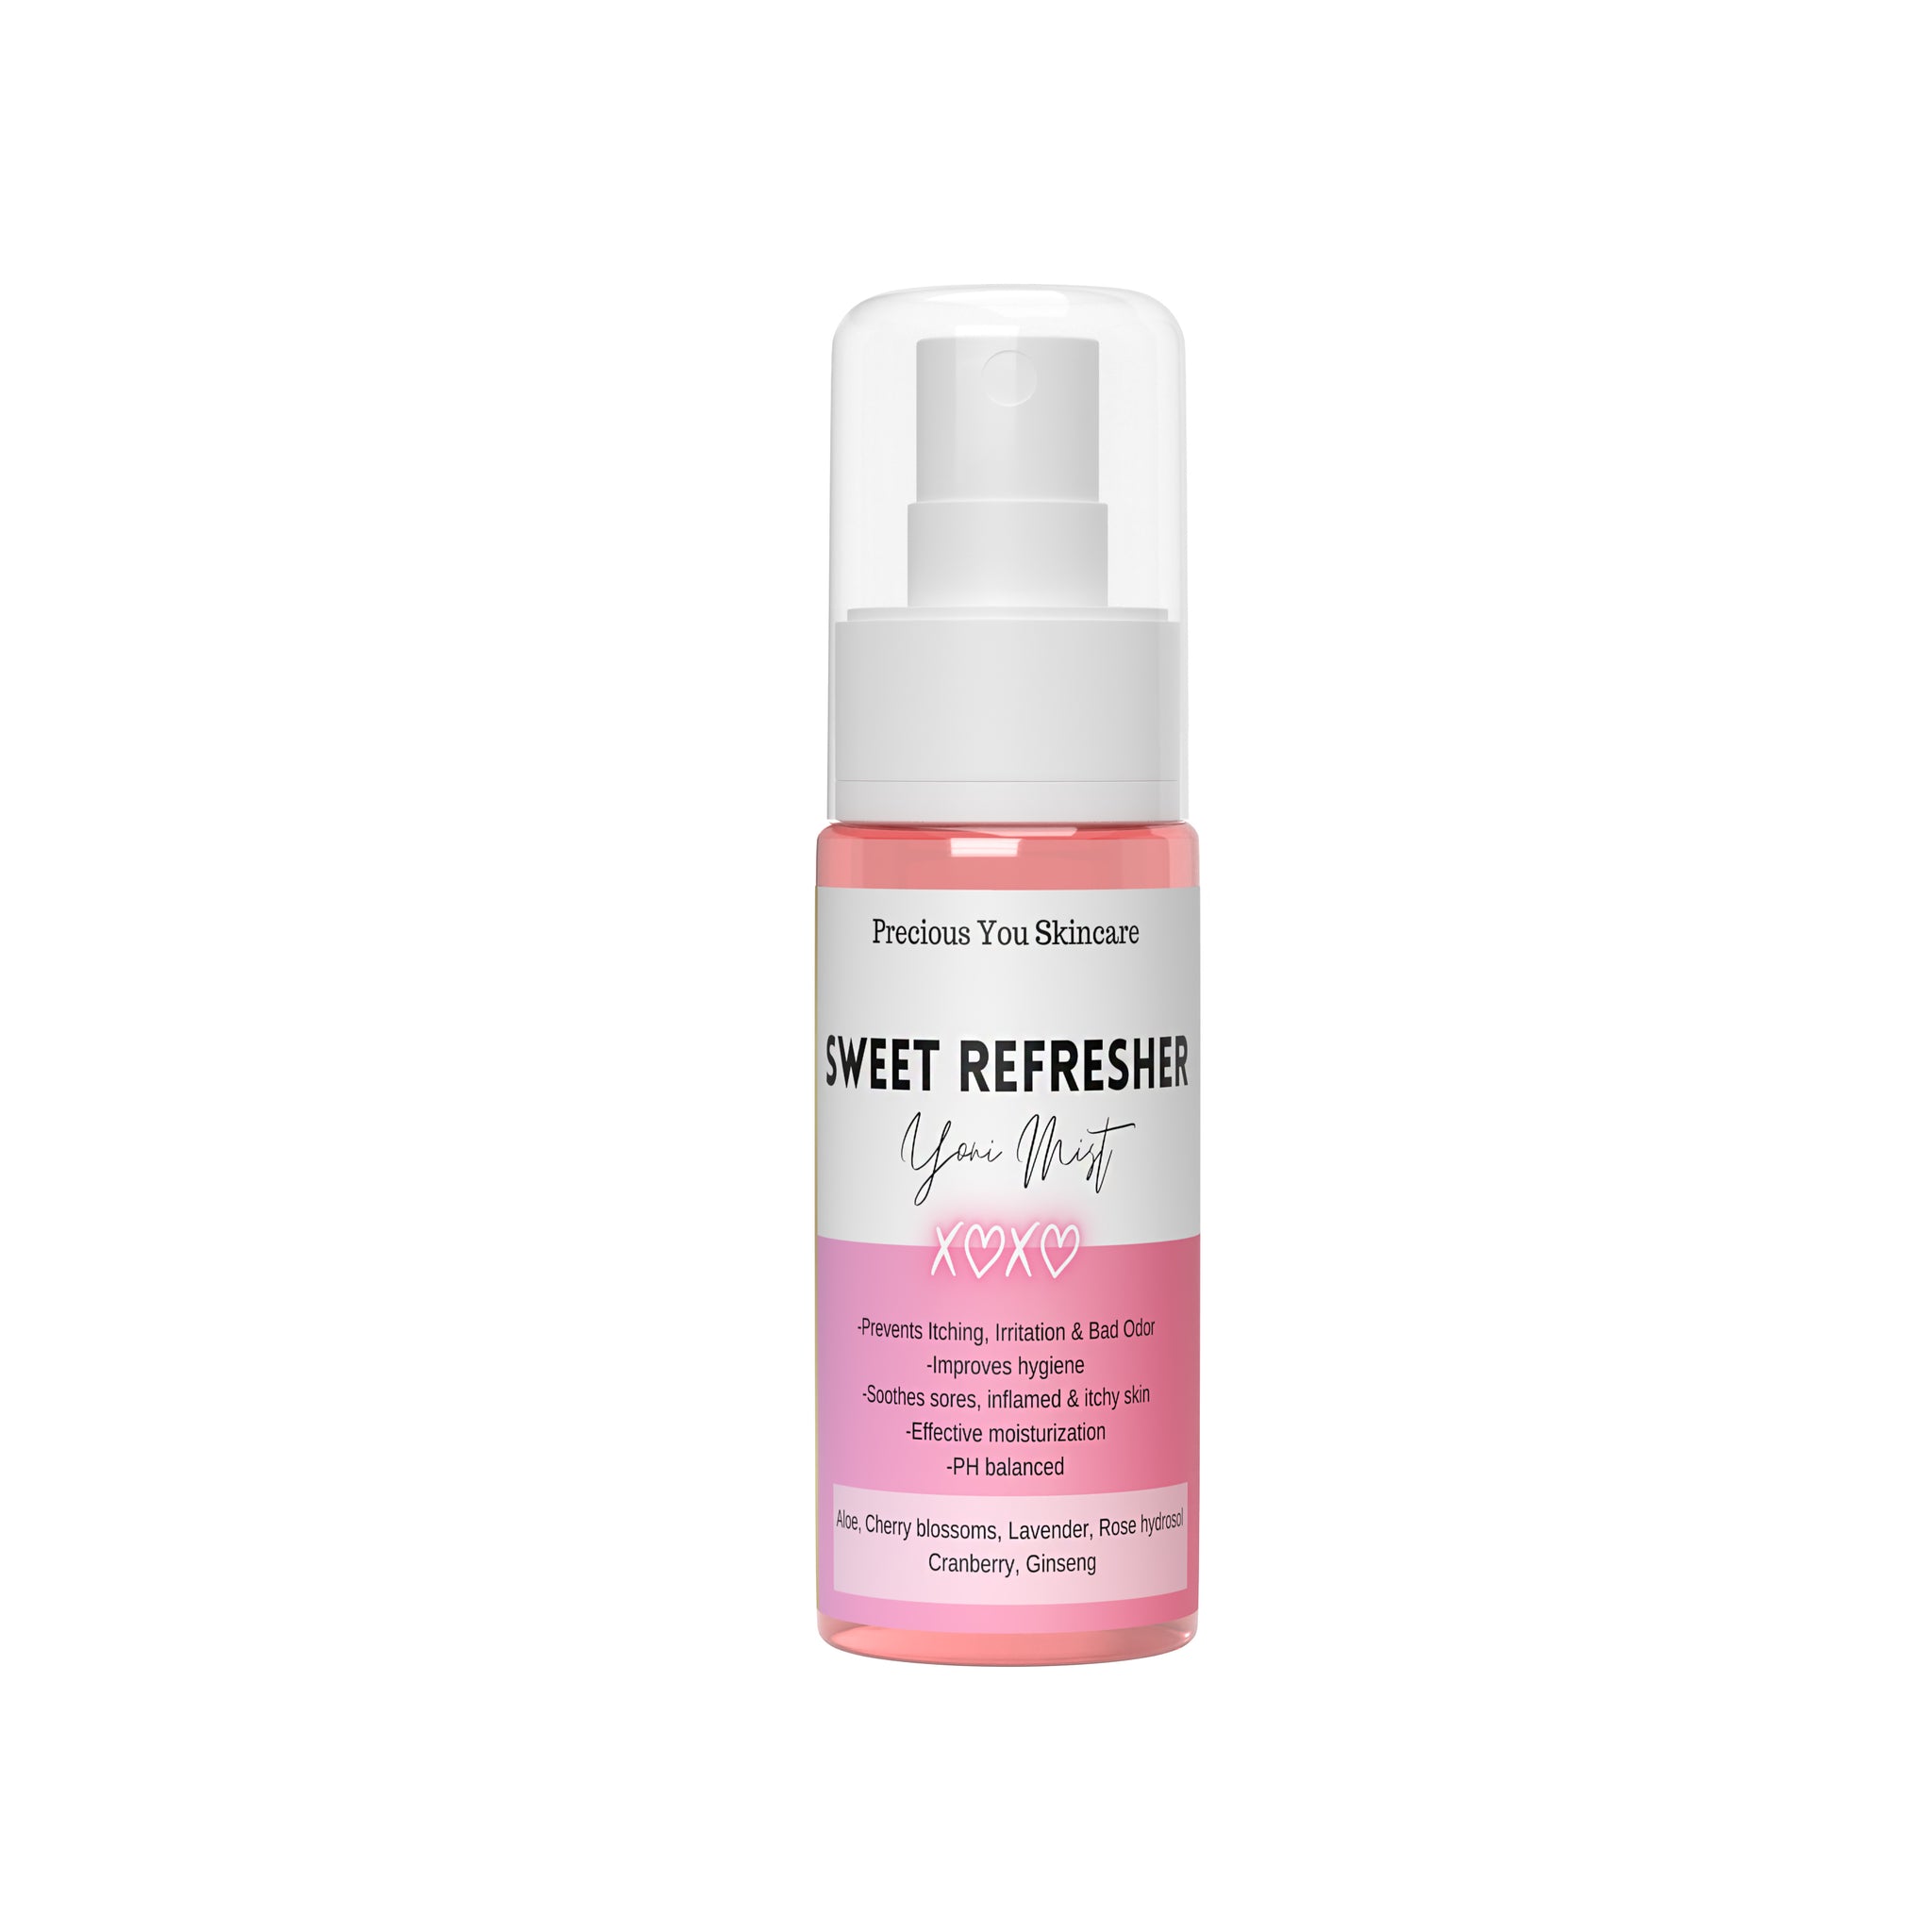 Sweet refresher mist- Probiotic + Strawberry extract